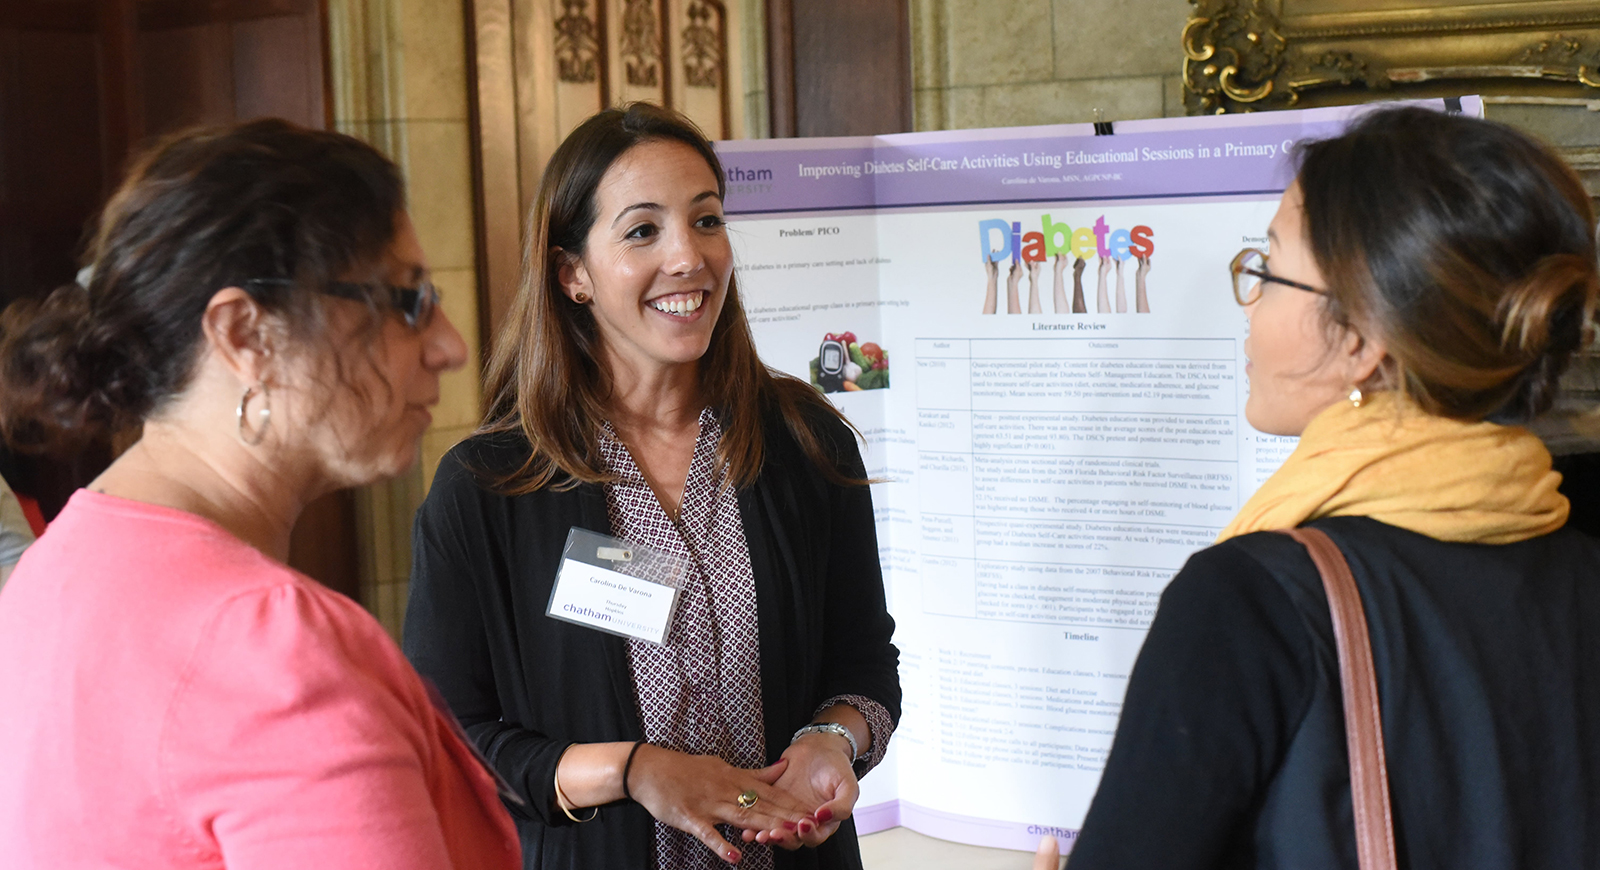 Carolina De Varona speaks to two women wearing business casual attire in front of a poster presentation. 